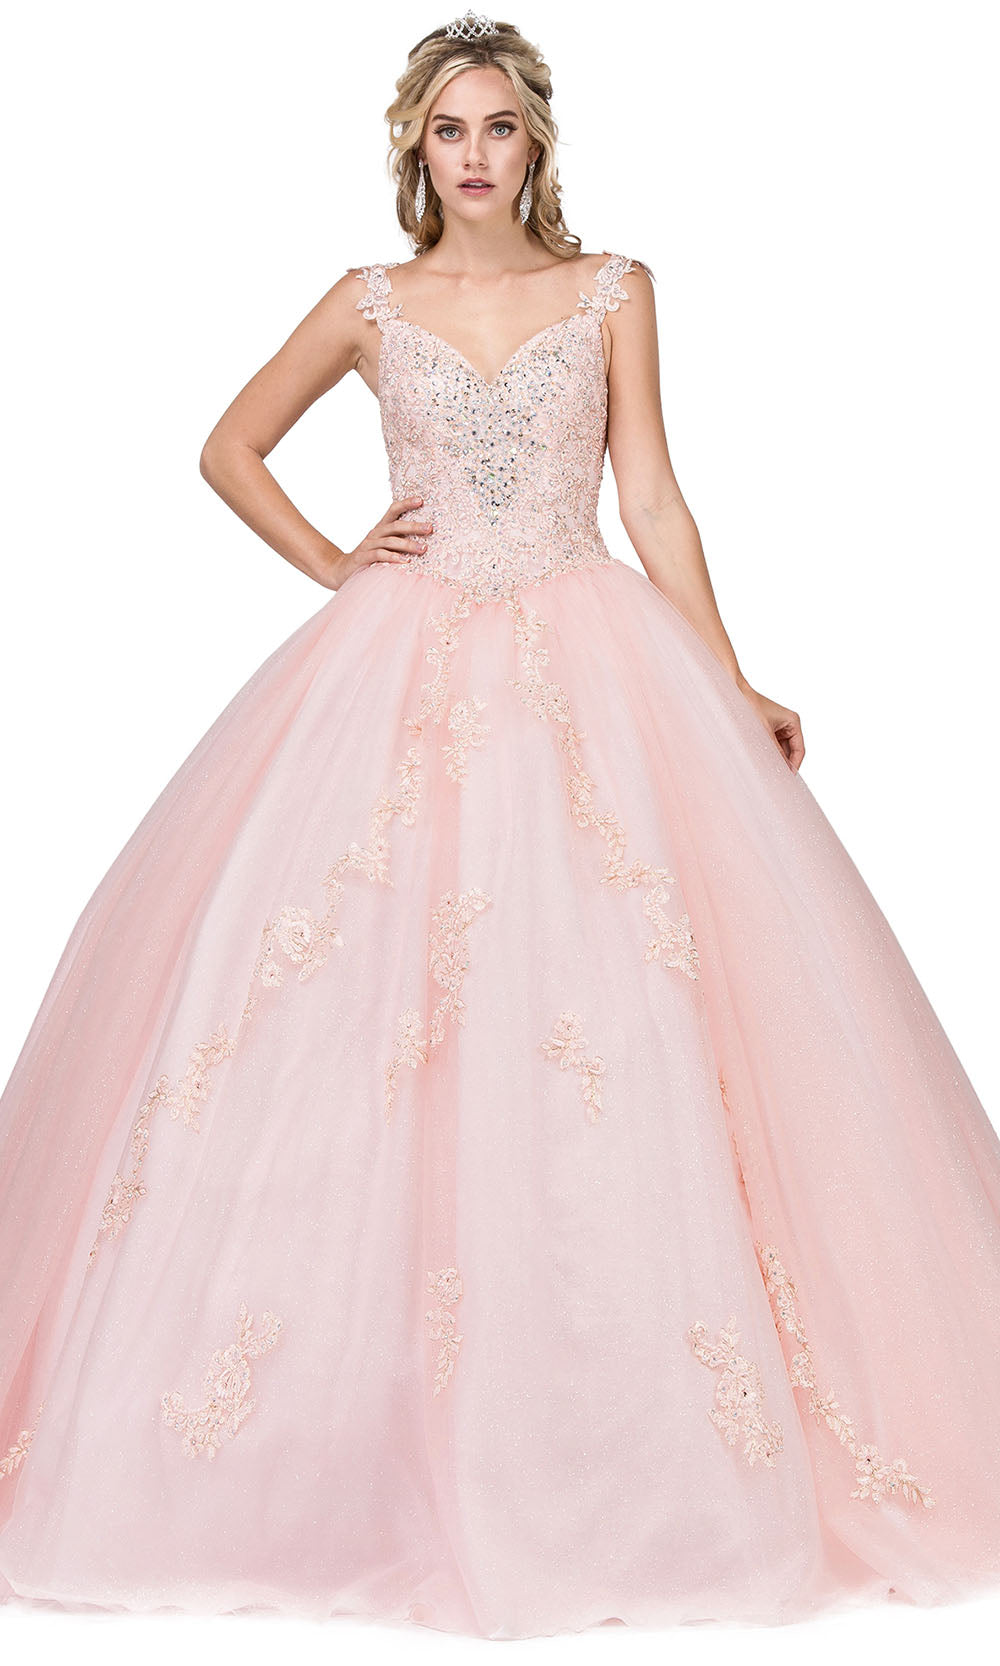 Dancing Queen - 1277 Floral Strap Beaded Lace Embellished Ballgown In Pink